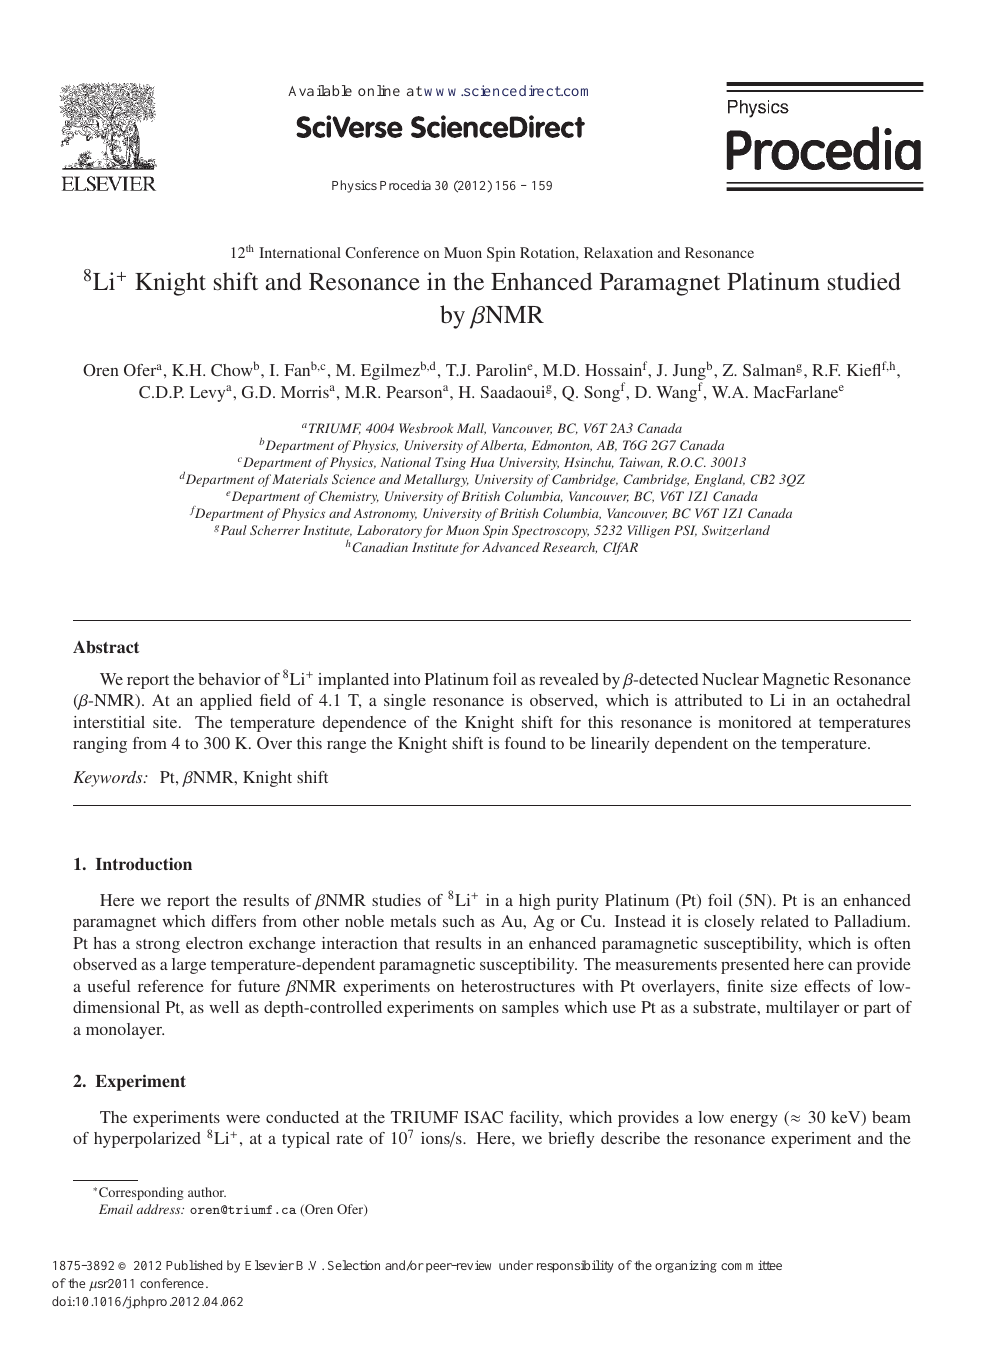 8li Knight Shift And Resonance In The Enhanced Paramagnet Platinum Studied By Bnmr Topic Of Research Paper In Physical Sciences Download Scholarly Article Pdf And Read For Free On Cyberleninka Open